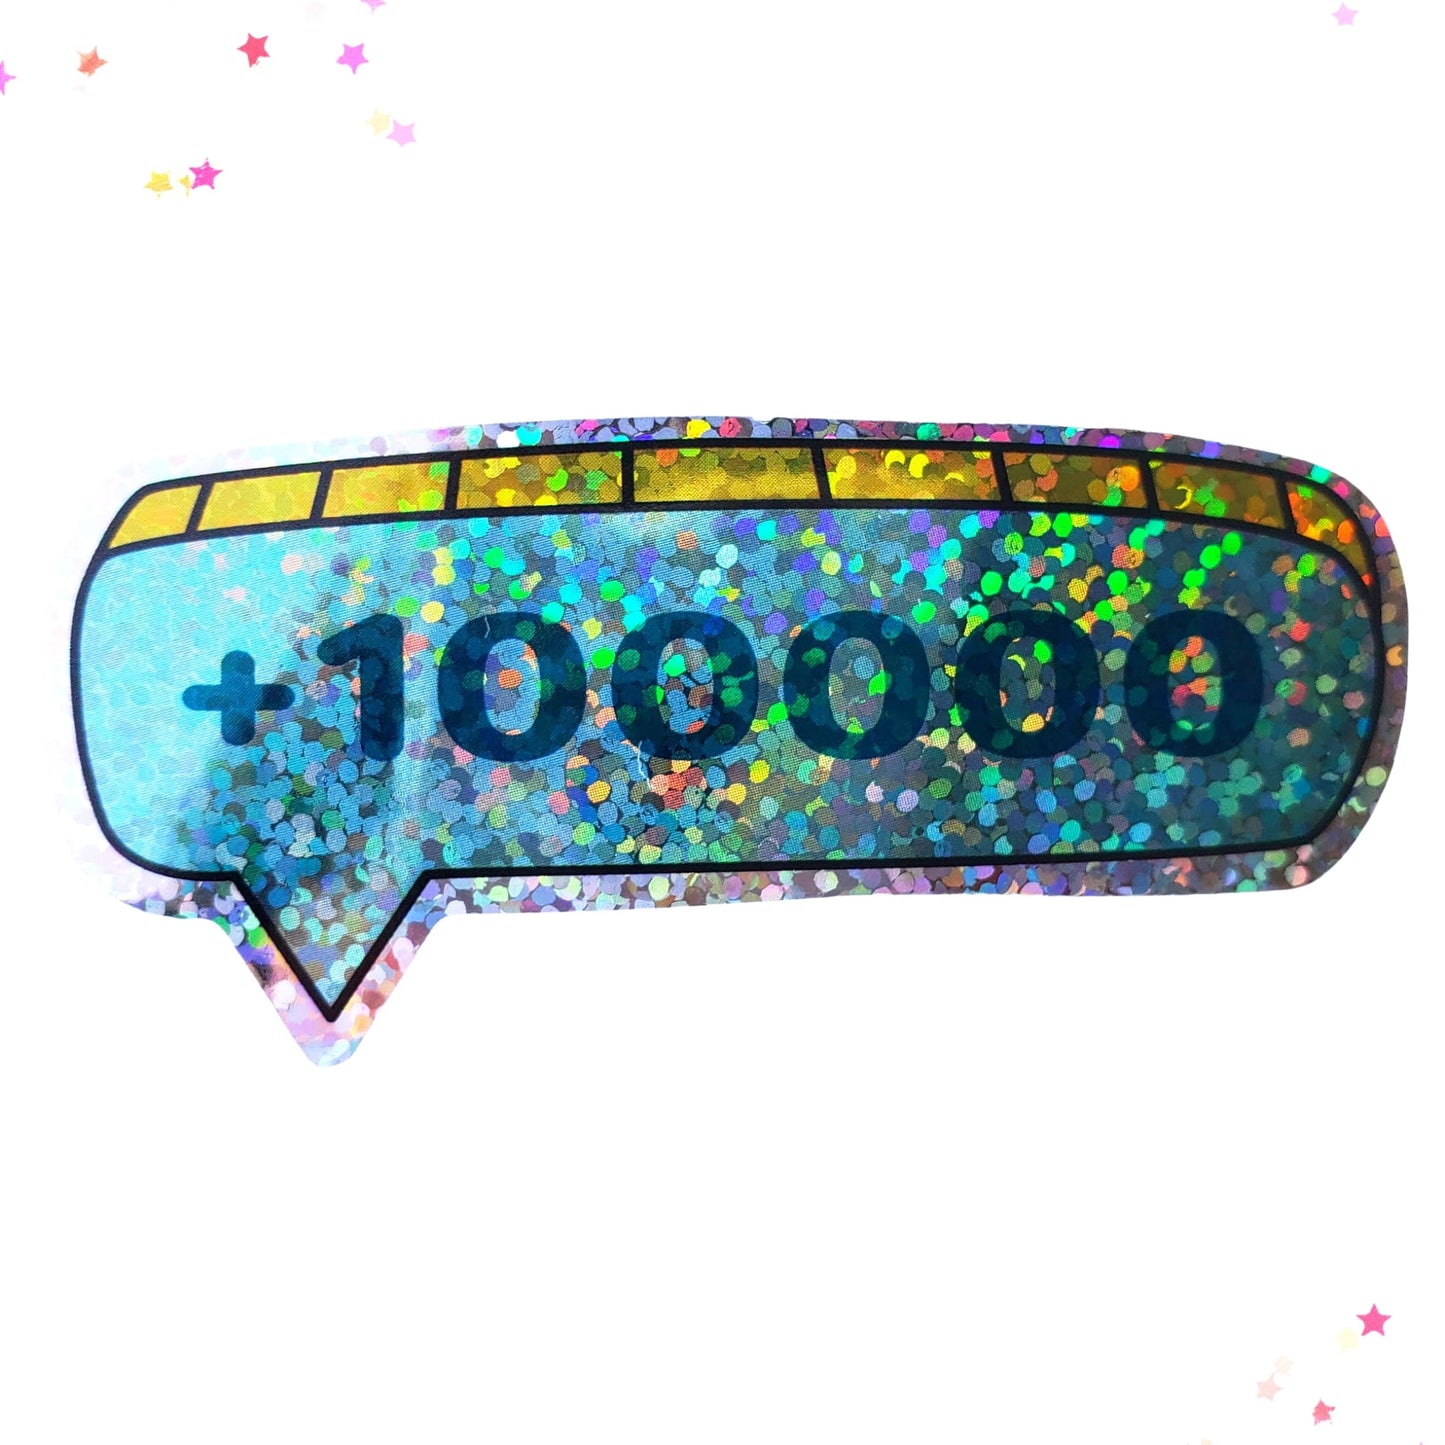 Premium Sticker - Sparkly Holographic Glitter +100000 from Confetti Kitty, Only 2.00